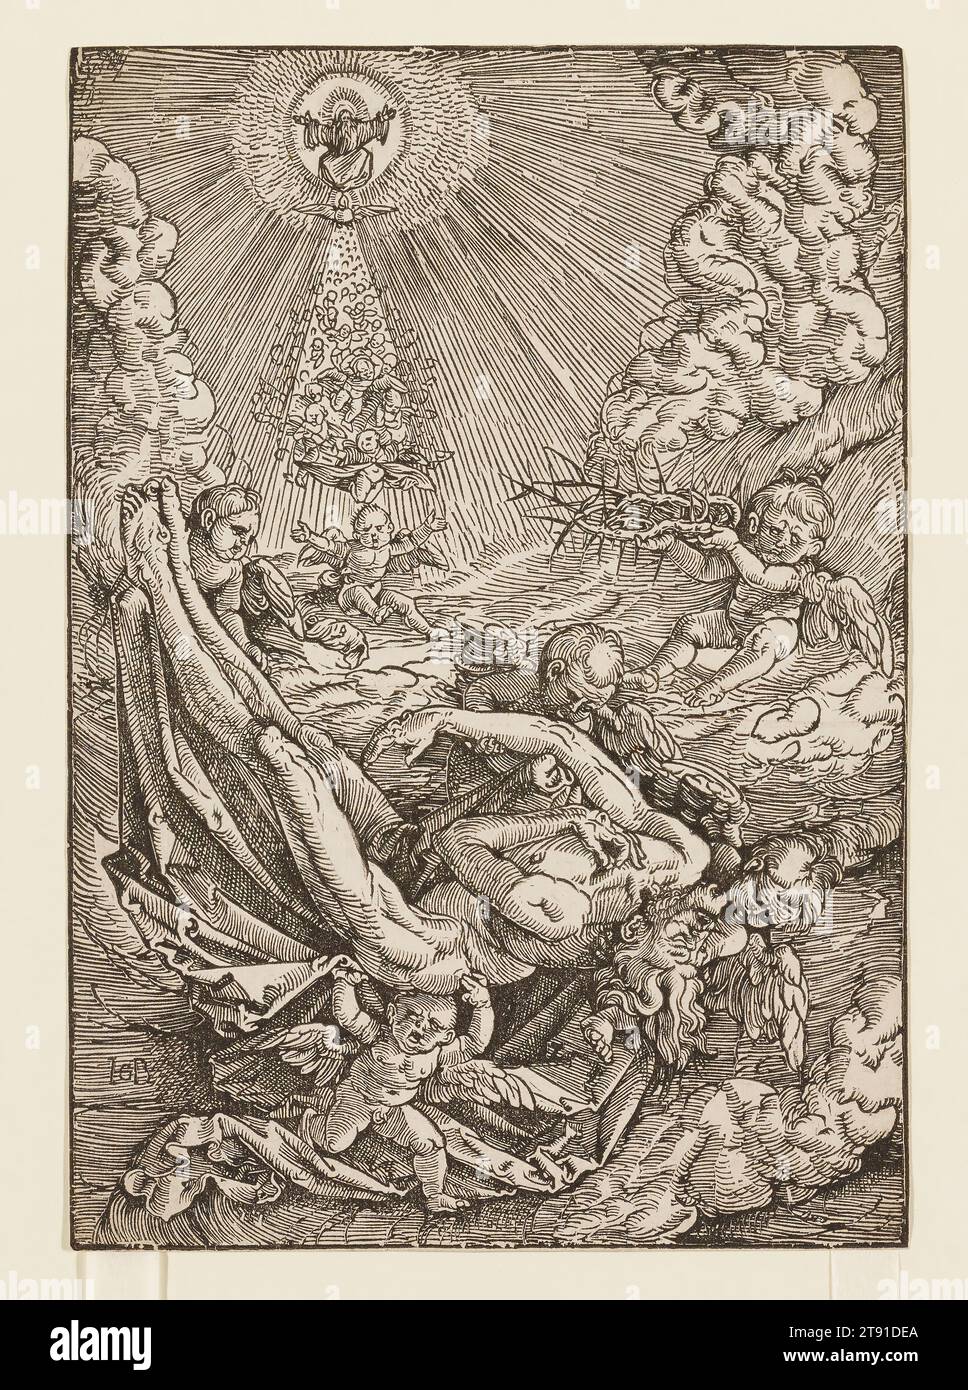 Christ Born to Heaven by Angels, 1516, Hans Baldung (Grien), German, 1484/85–1545, 8 3/4 x 6 1/16 in. (22.23 x 15.4 cm) (image)19 3/4 × 15 3/4 × 1 1/8 in. (50.17 × 40.01 × 2.86 cm) (outer frame), Woodcut, Germany, 16th century Stock Photo